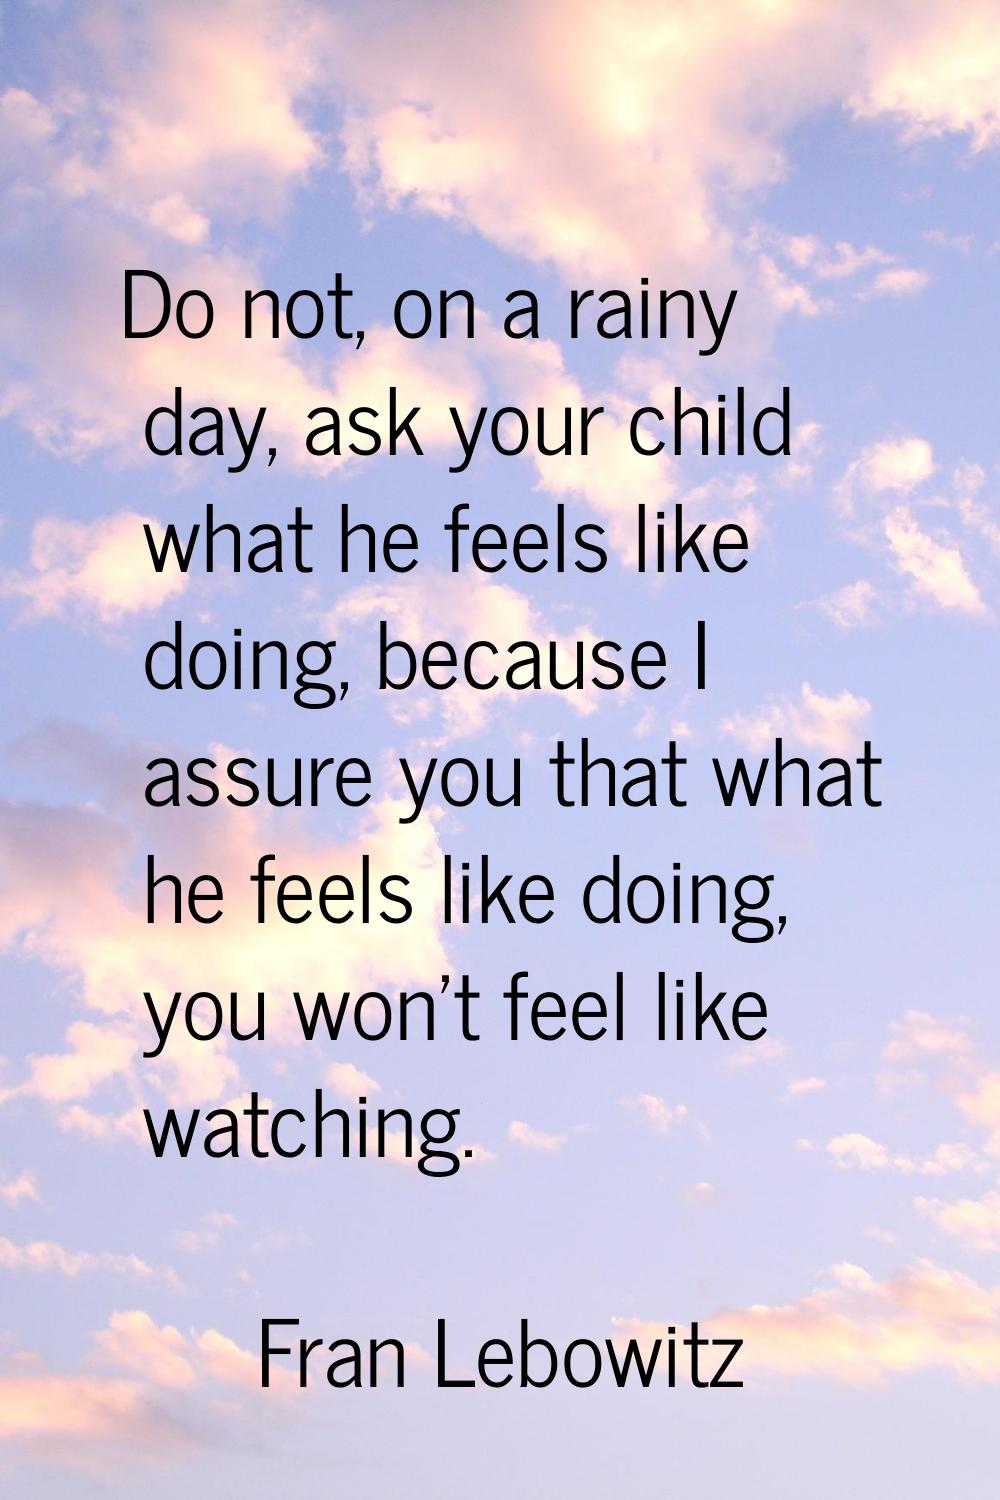 Do not, on a rainy day, ask your child what he feels like doing, because I assure you that what he 